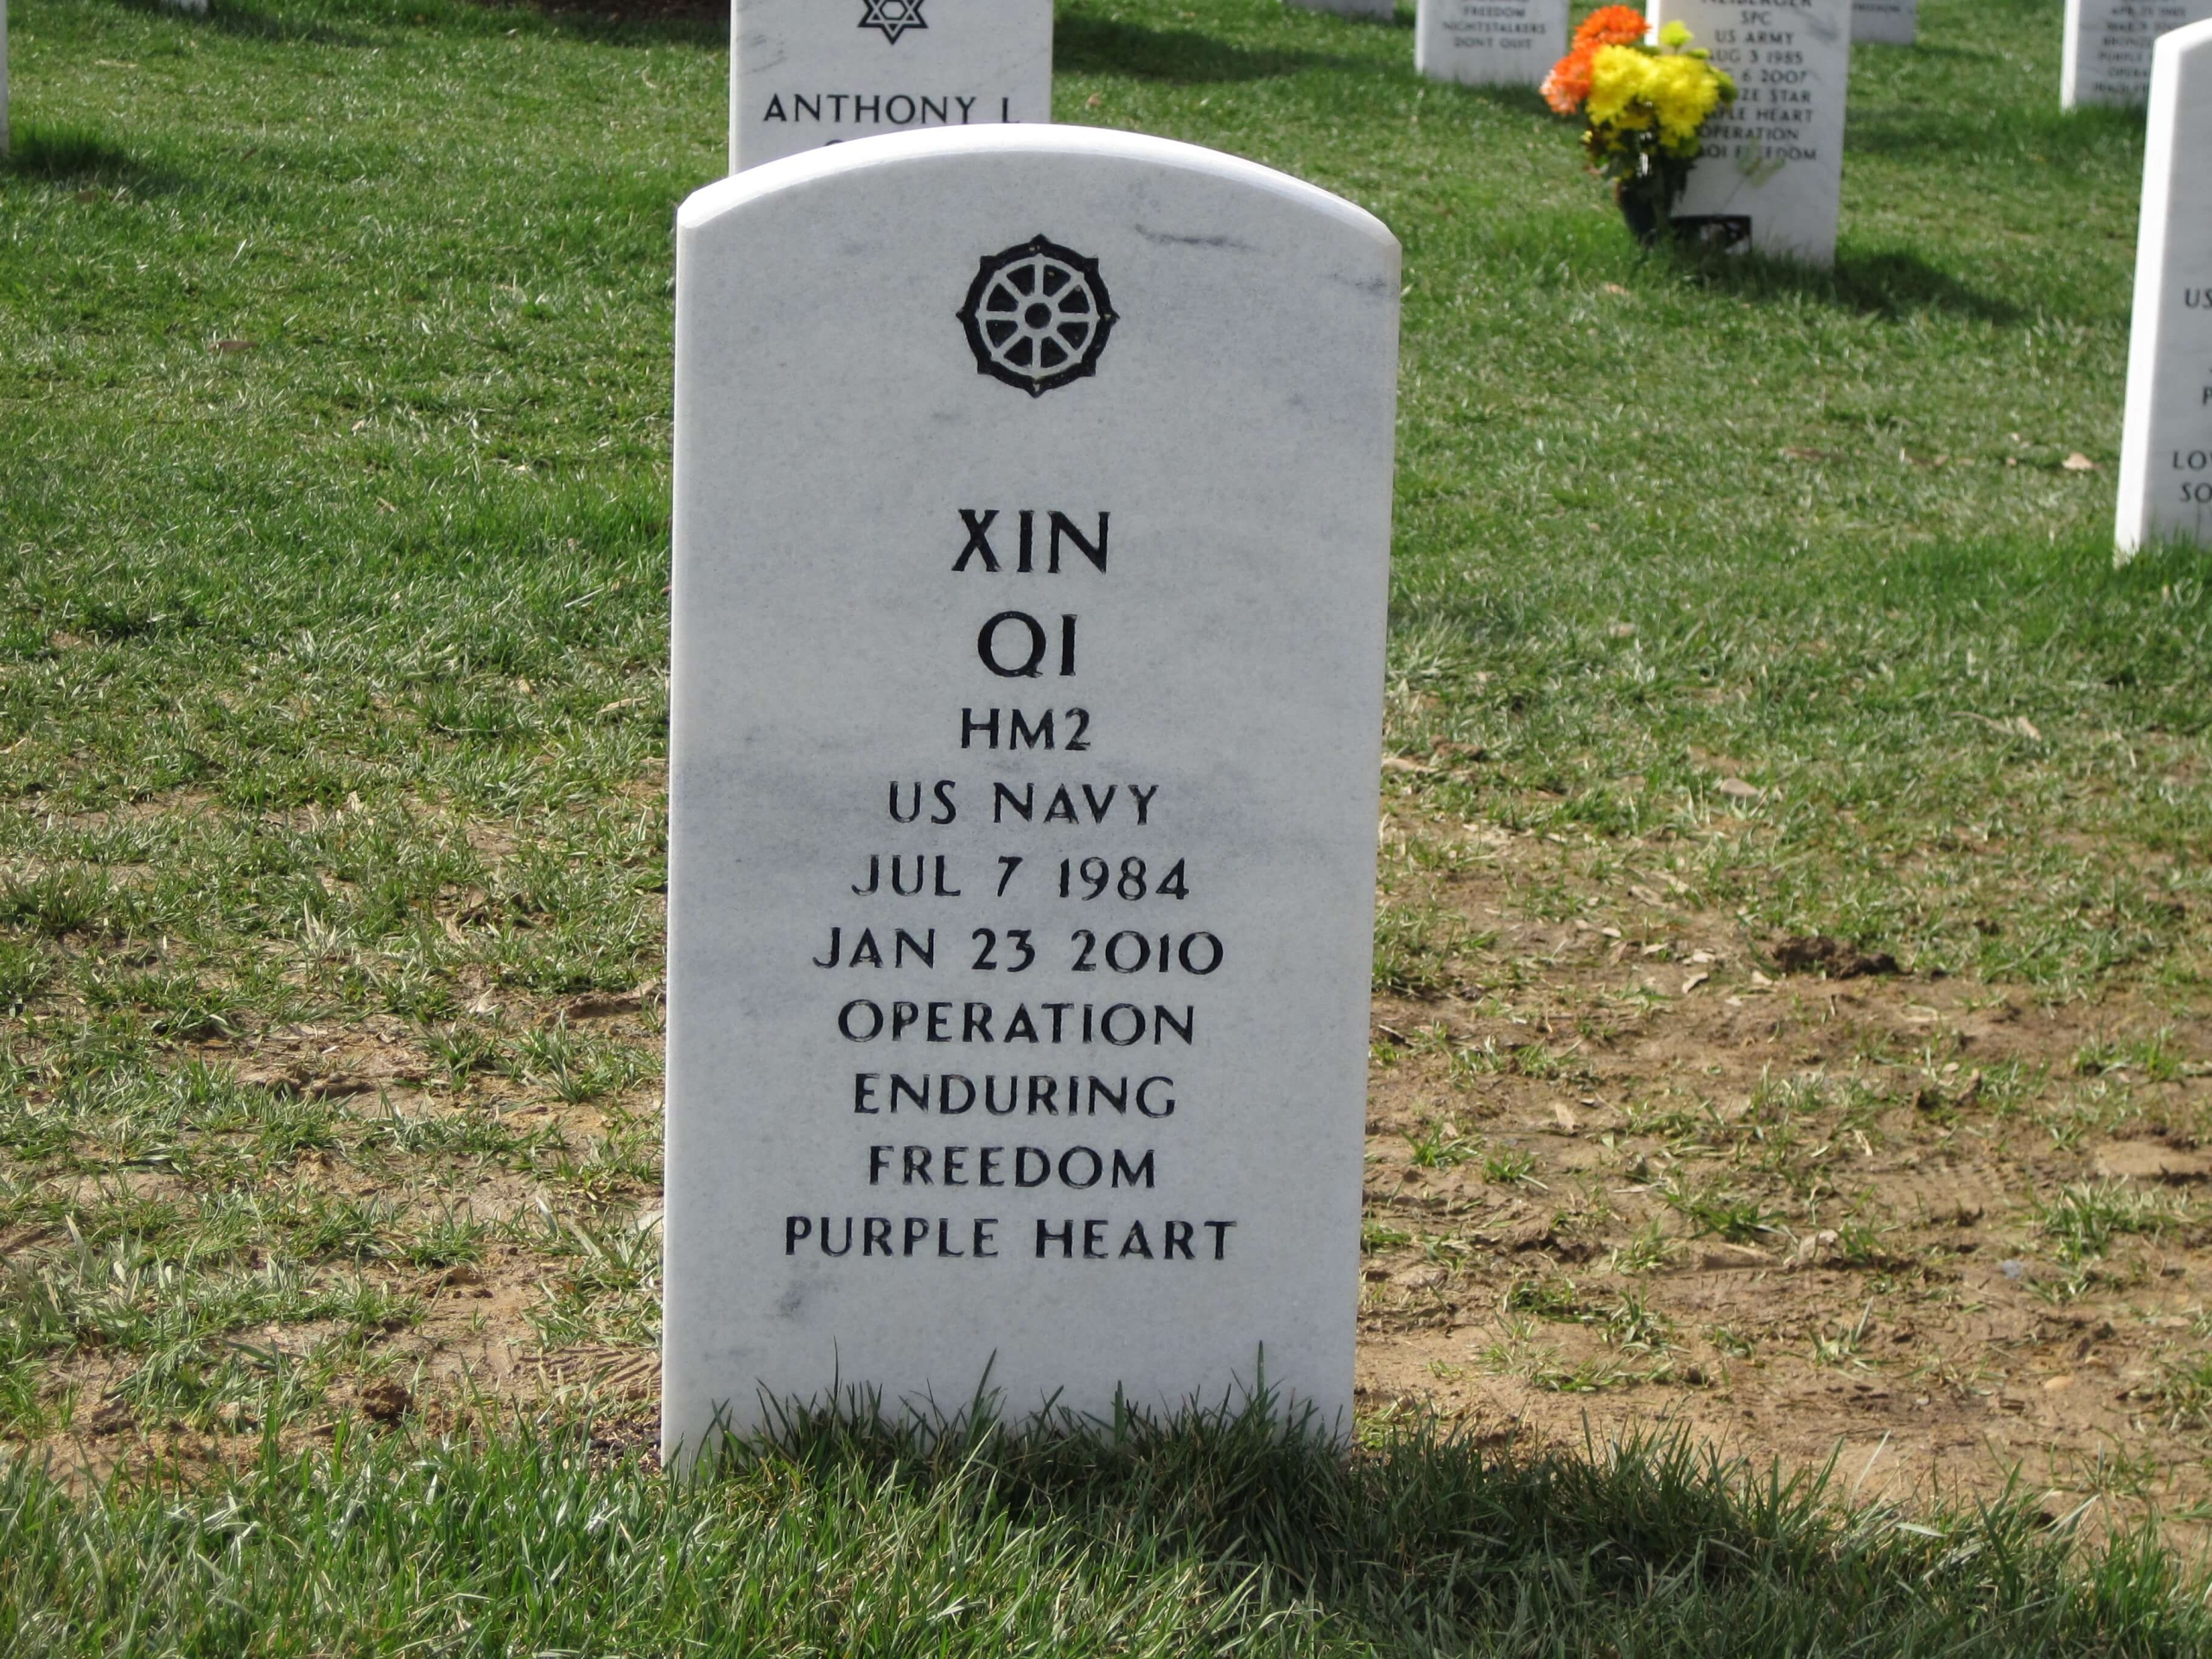 xin-oi-gravesite-photo-by-eileen-horan-april-2010-001